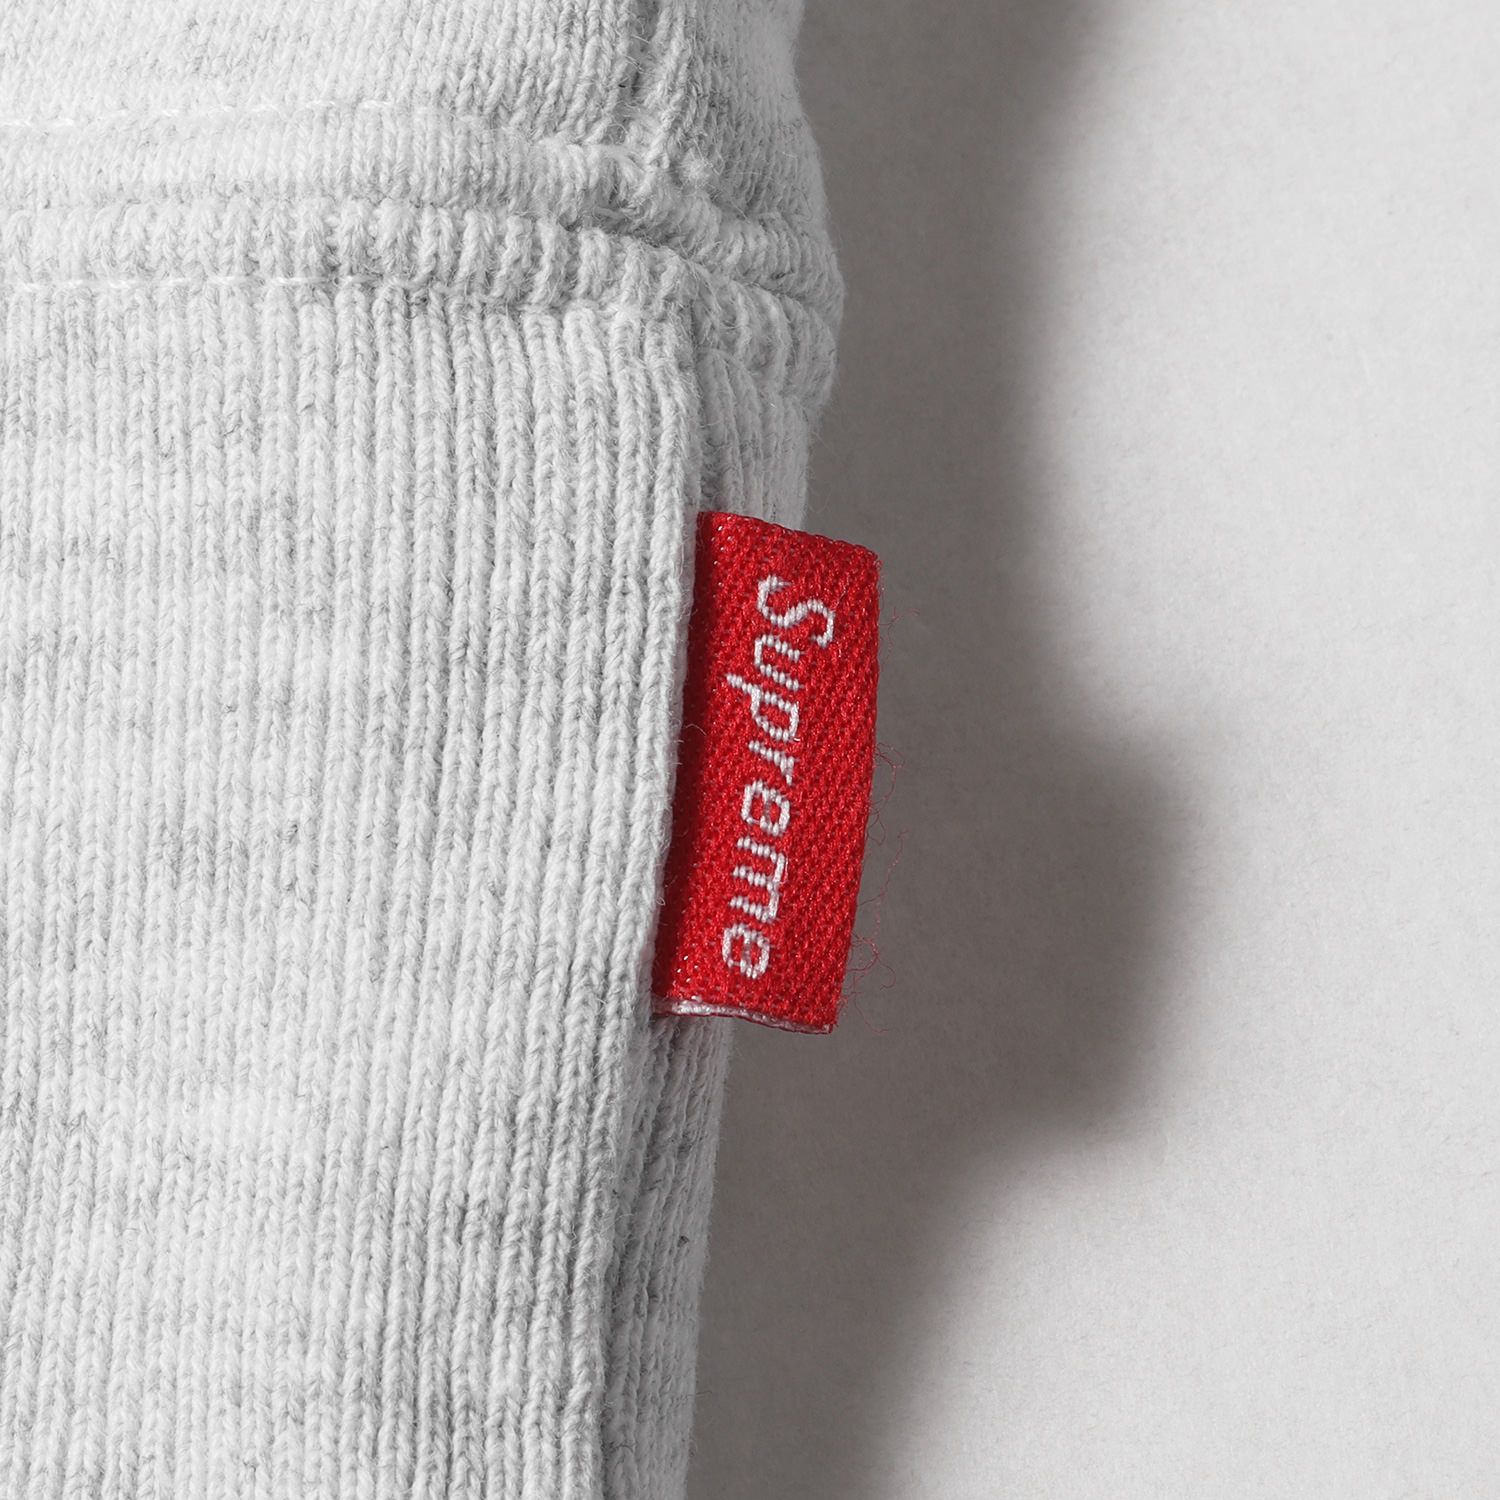 18ss Supreme Illegal Business Hooded